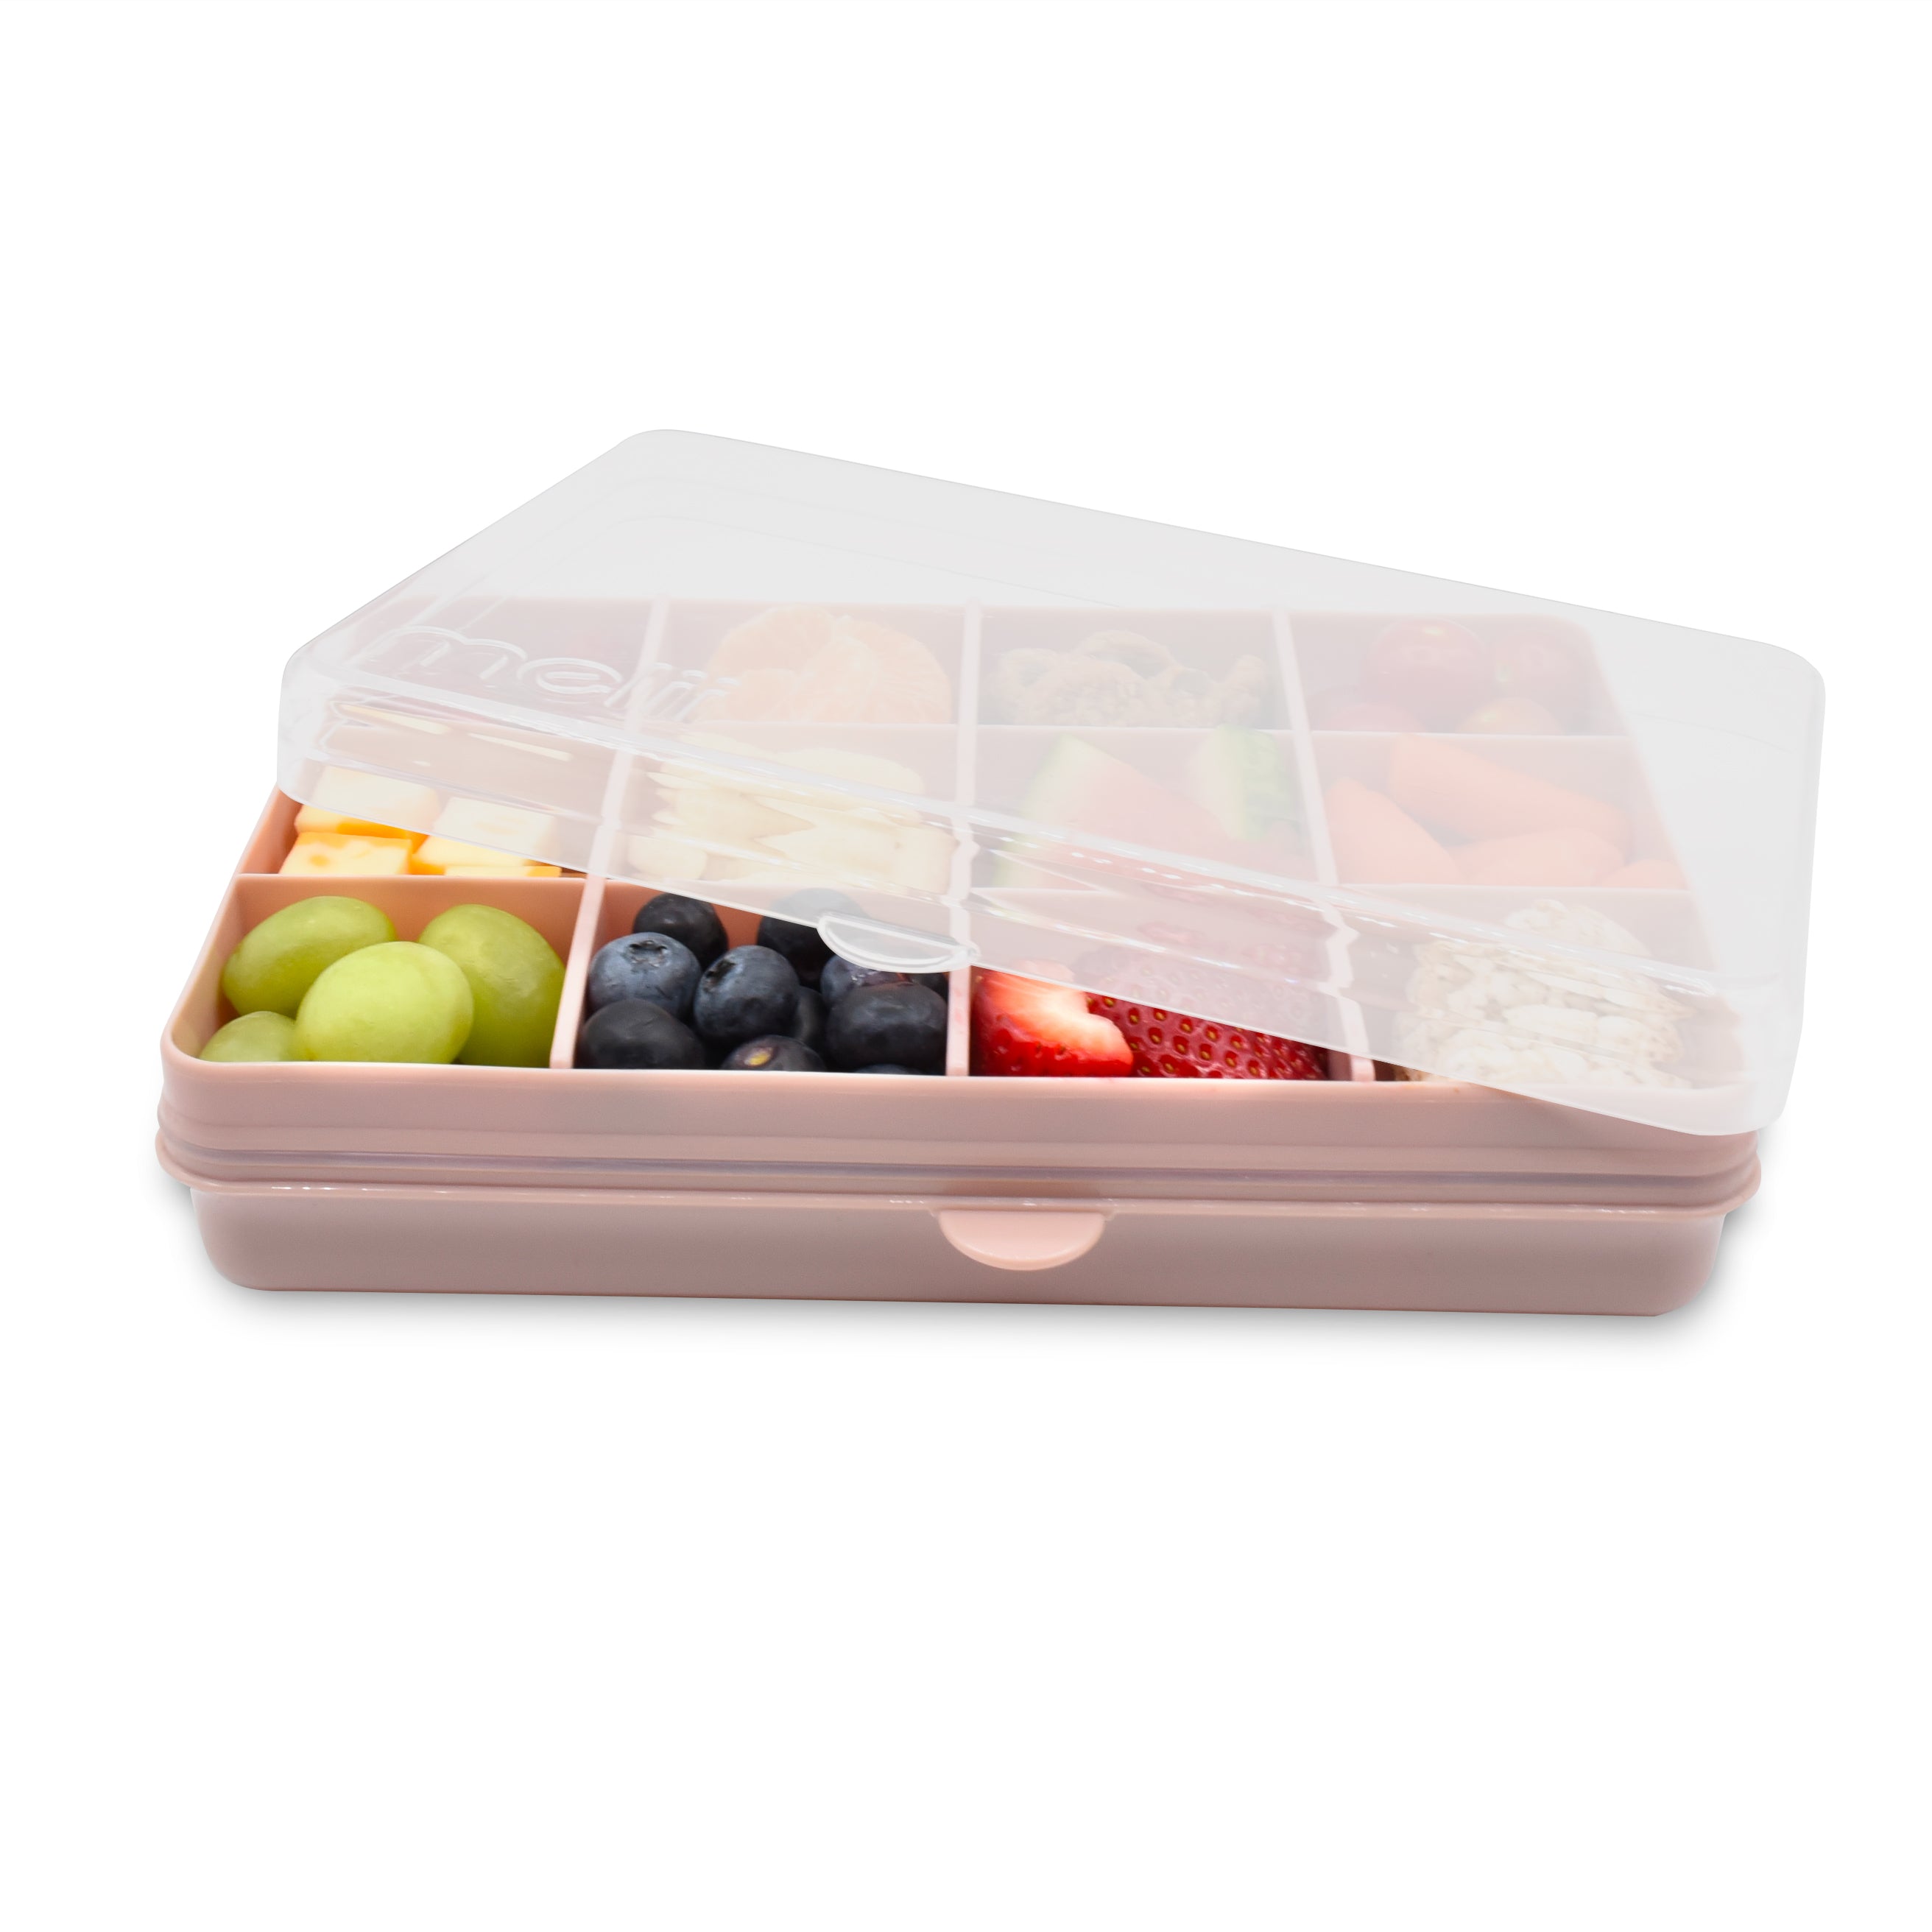 Mini-Snackle Box! NEW! PINK latch Meal Prep On the Go Lunch or Snack